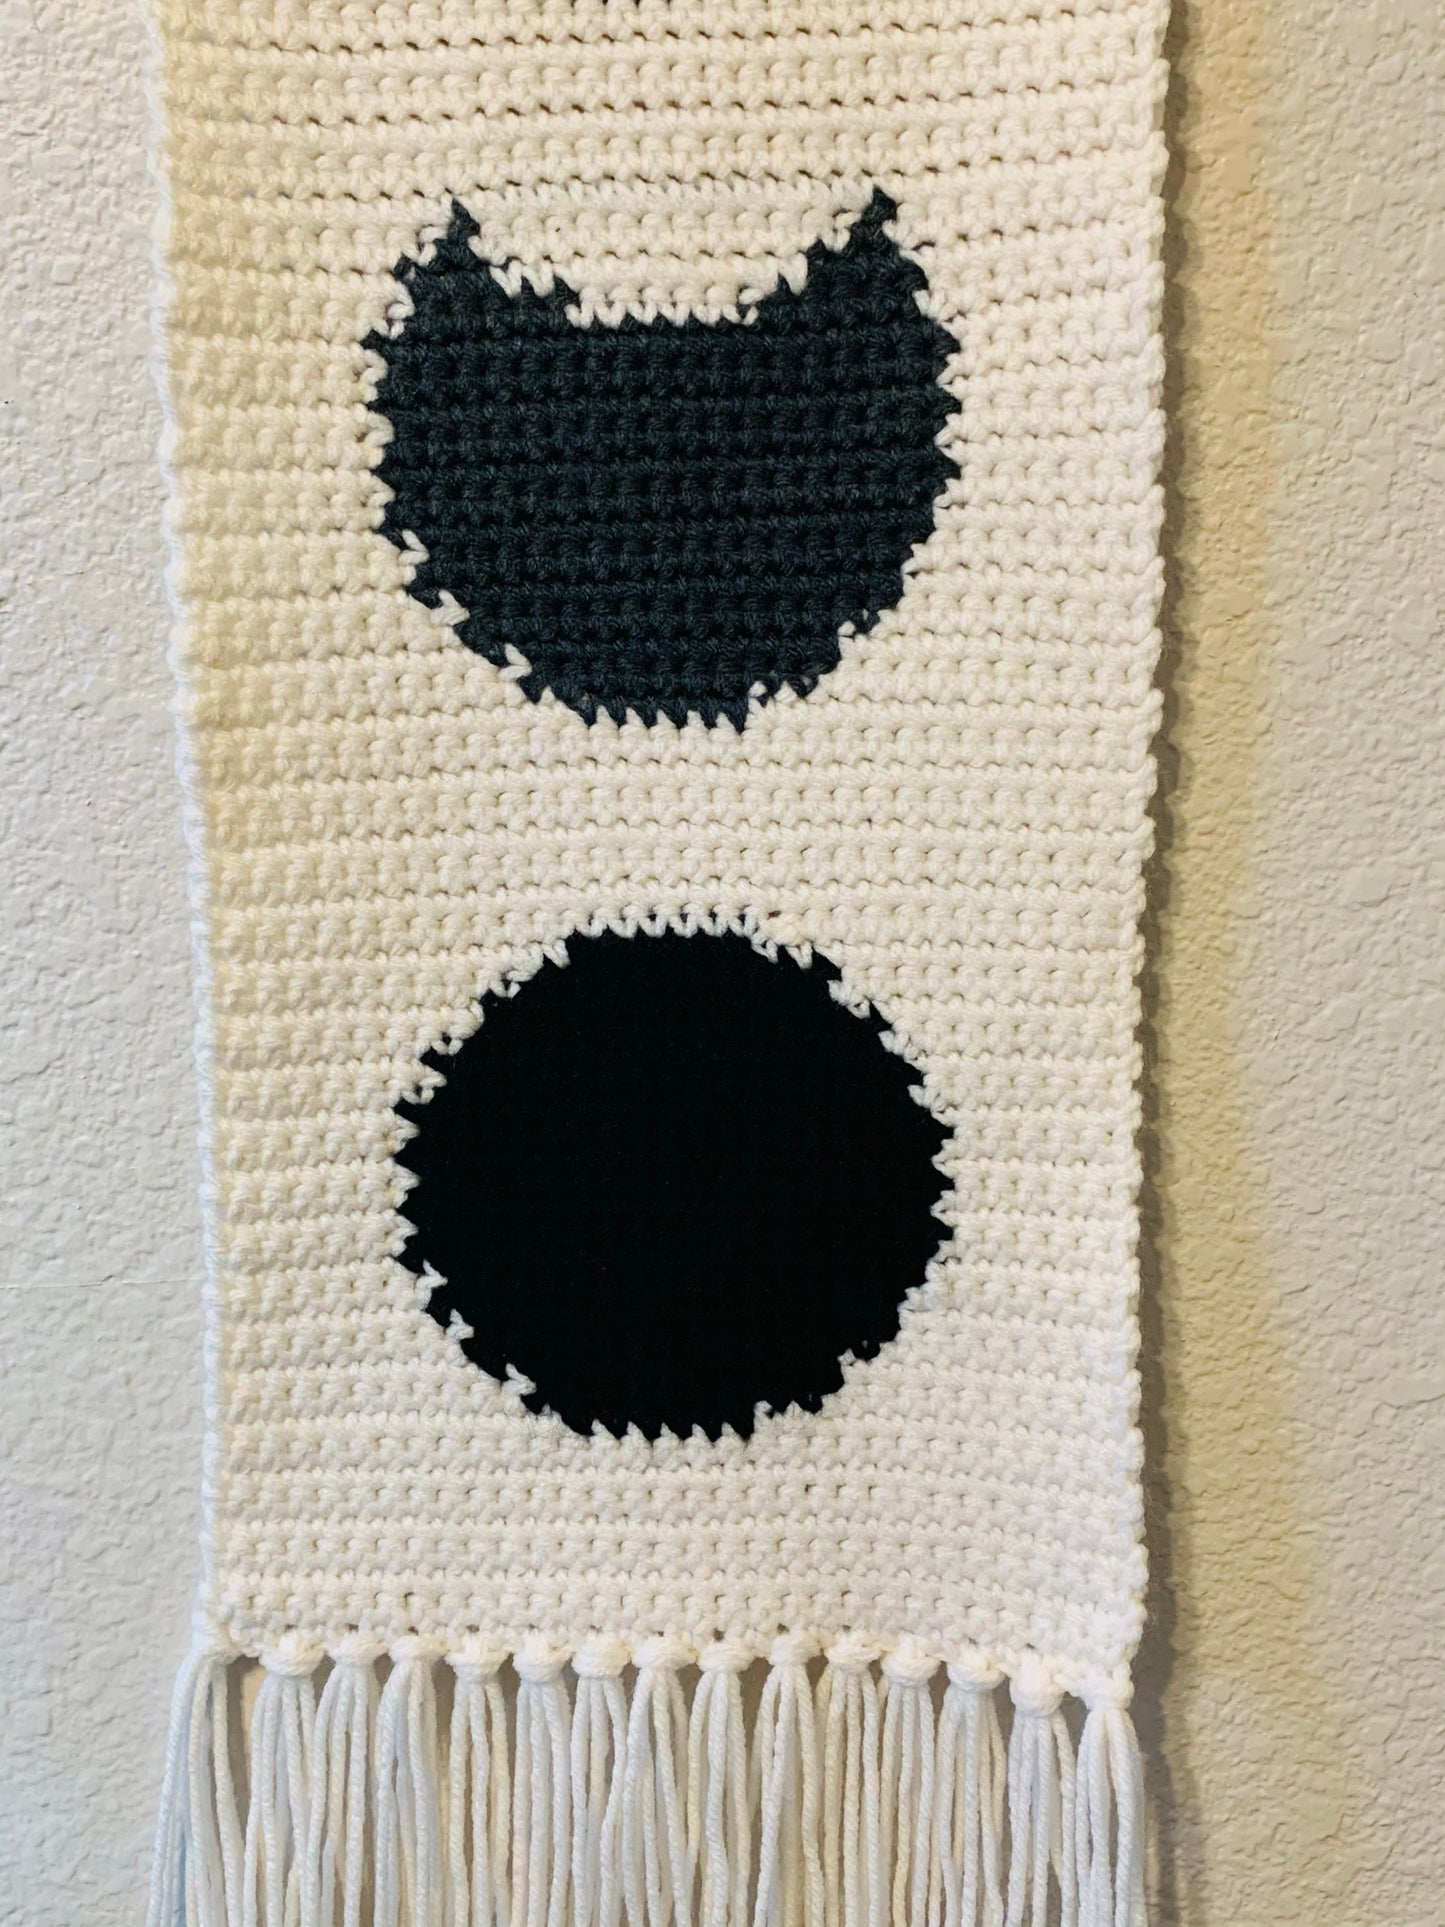 Moon Phases Wall Hanging